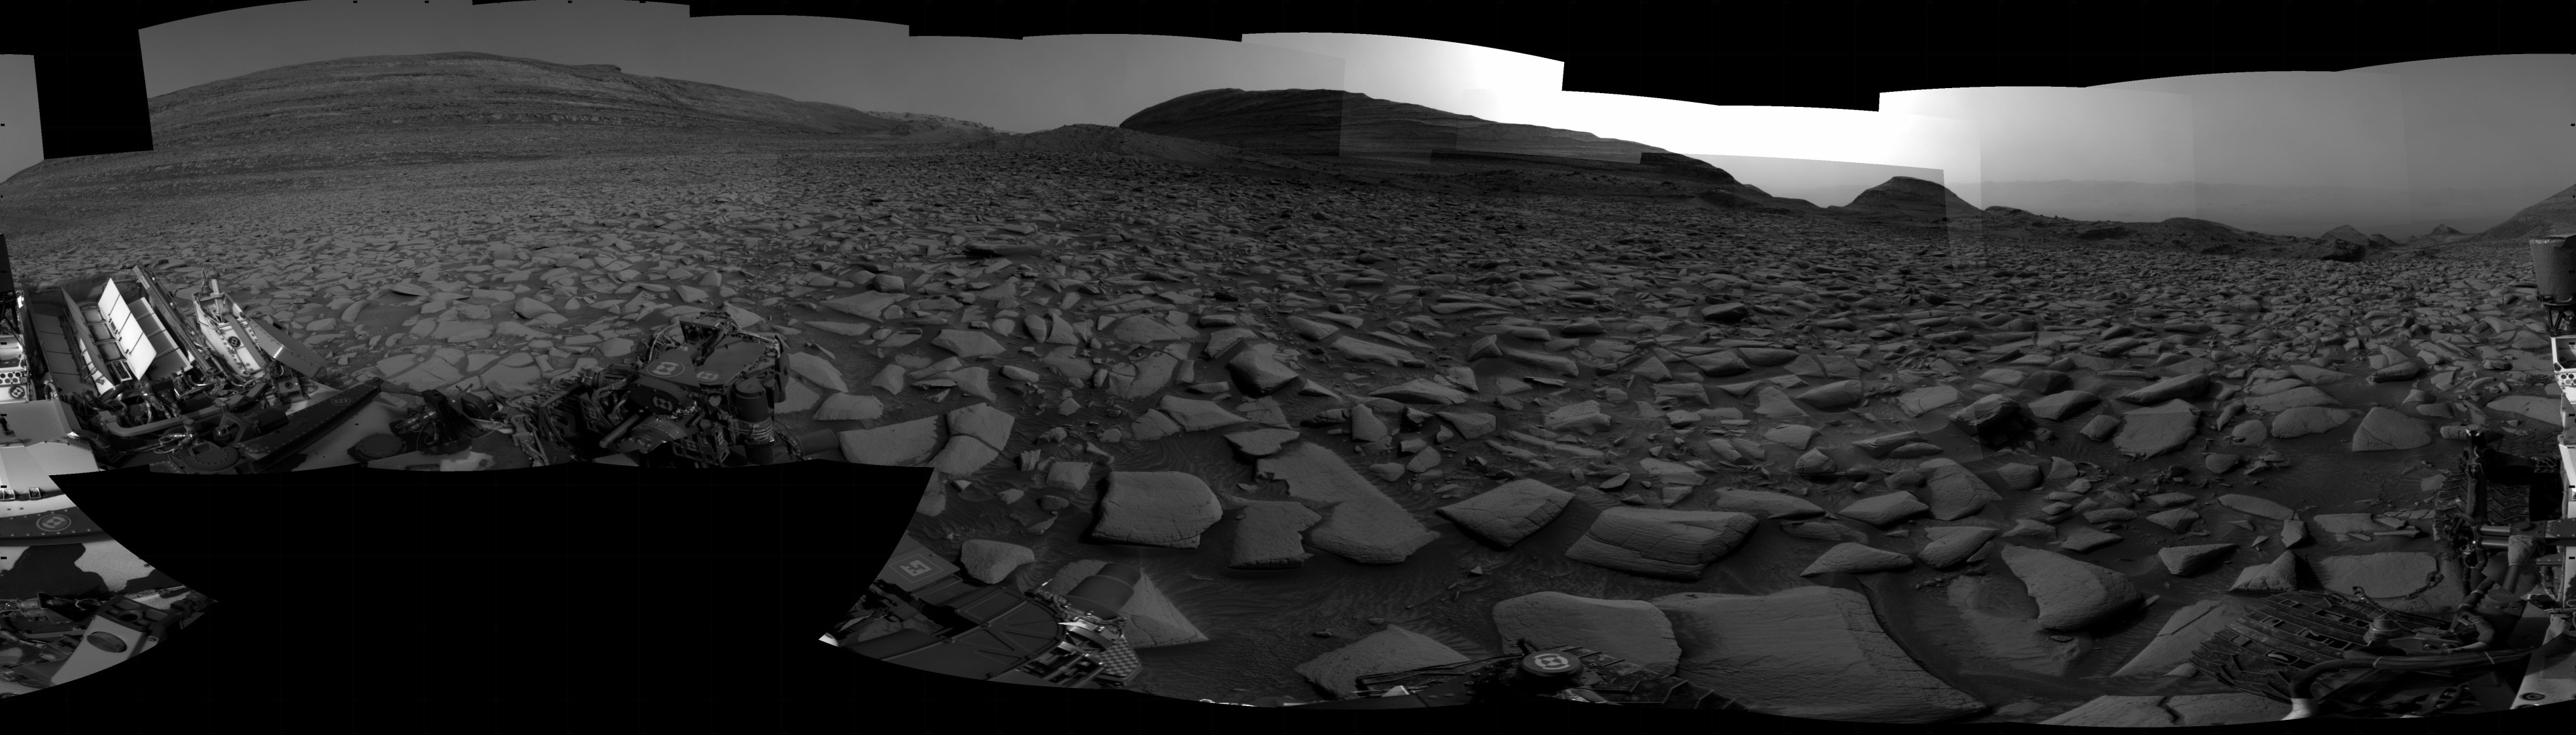 Curiosity took the images on April 07, 2024, Sol 4148 of the Mars Science Laboratory mission at drive 1990, site number 106. The local mean solar time for the image exposures was 3 PM.